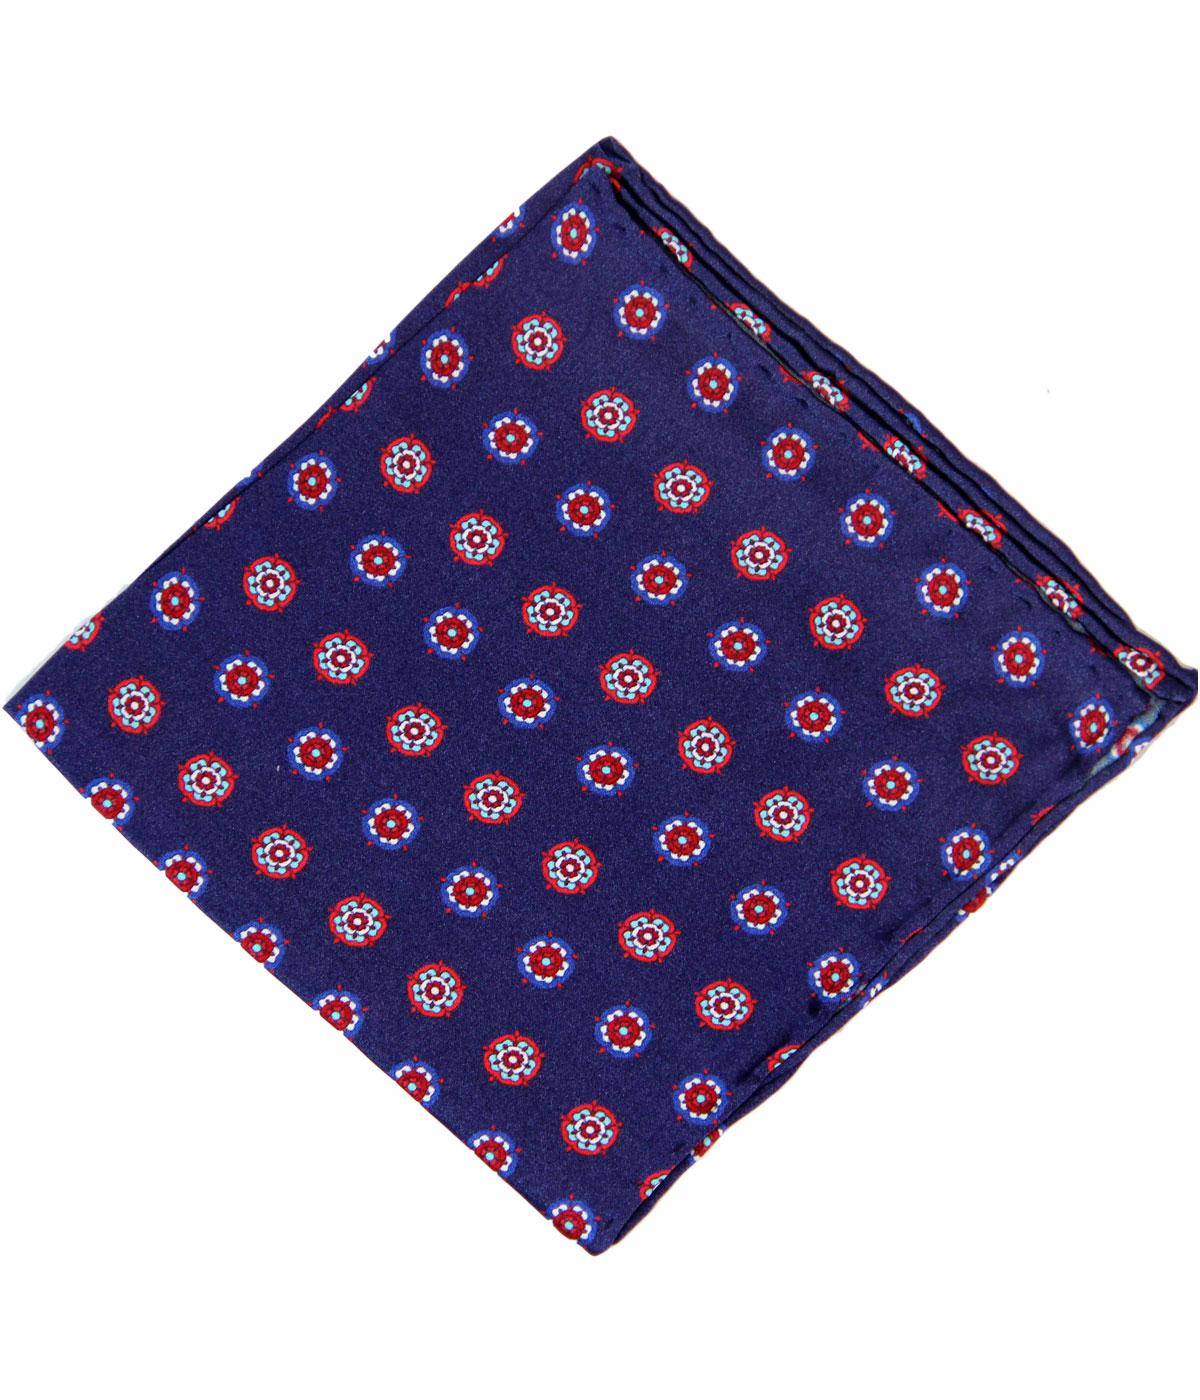 TOOTAL 1960s Mod Roses Print Silk Pocket Square